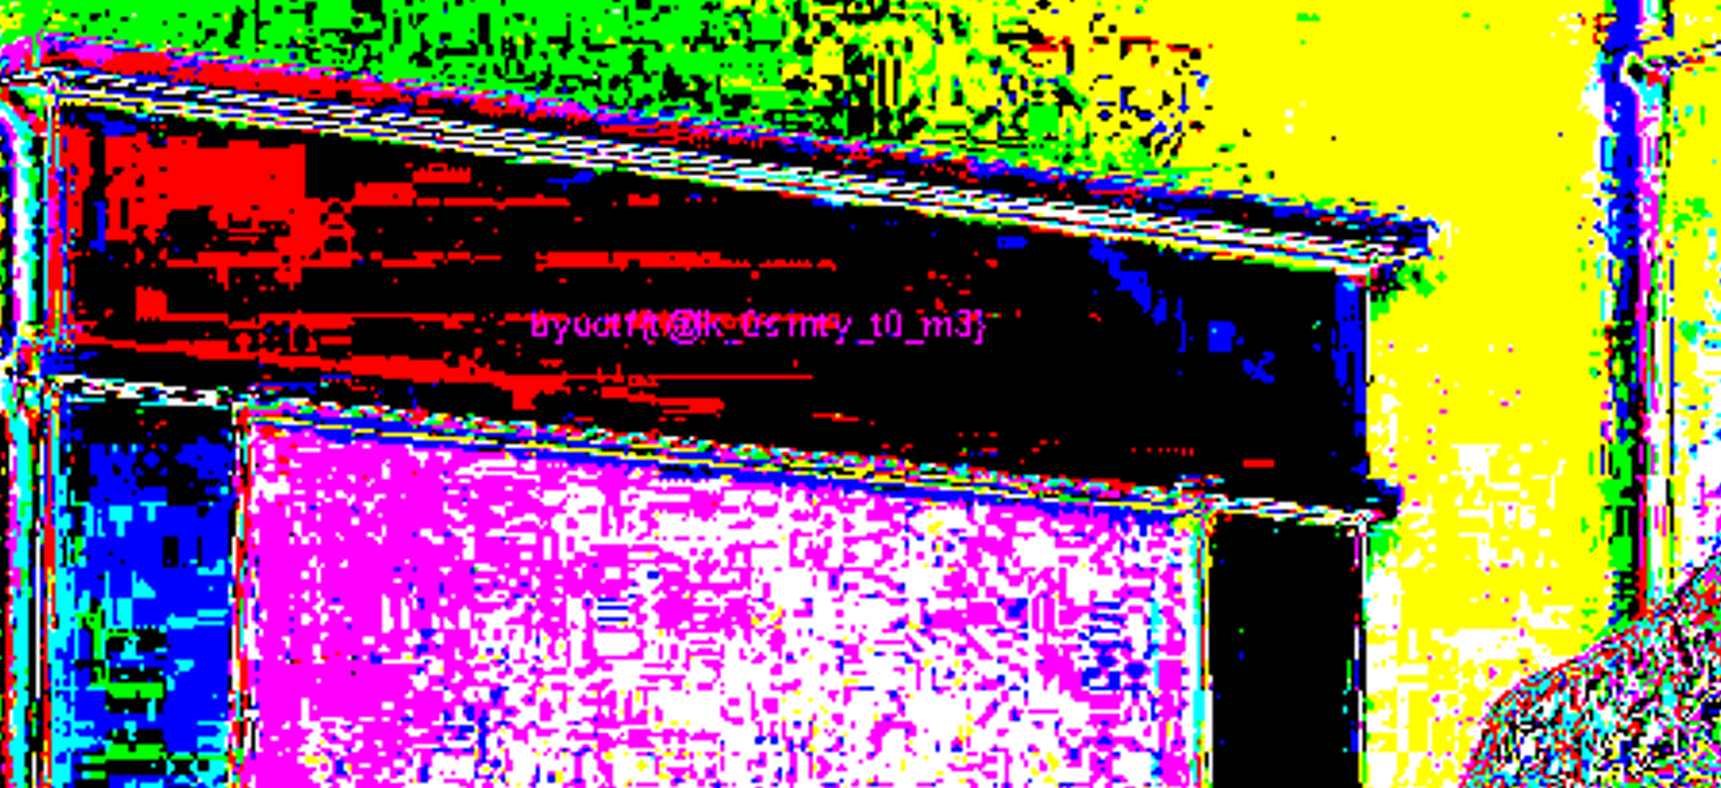 A randomly color-mapped version of the picture, zoomed in to the window frame, a line of magenta text can be found on the picture which says the flag.